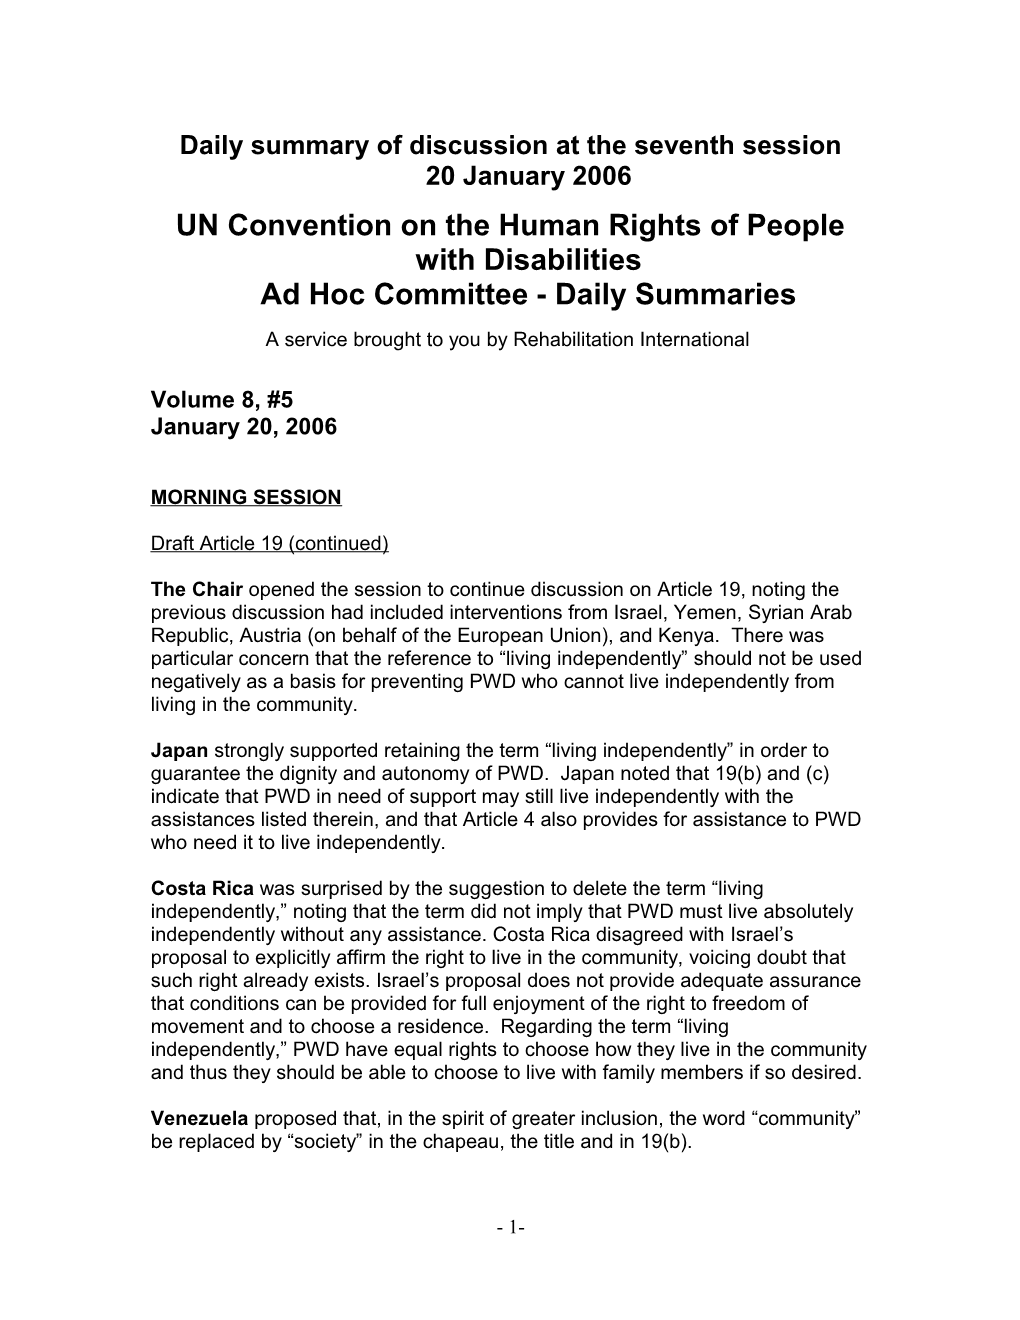 UN Convention on the Human Rights of People with Disabilitiesad Hoc Committee - Daily Summaries